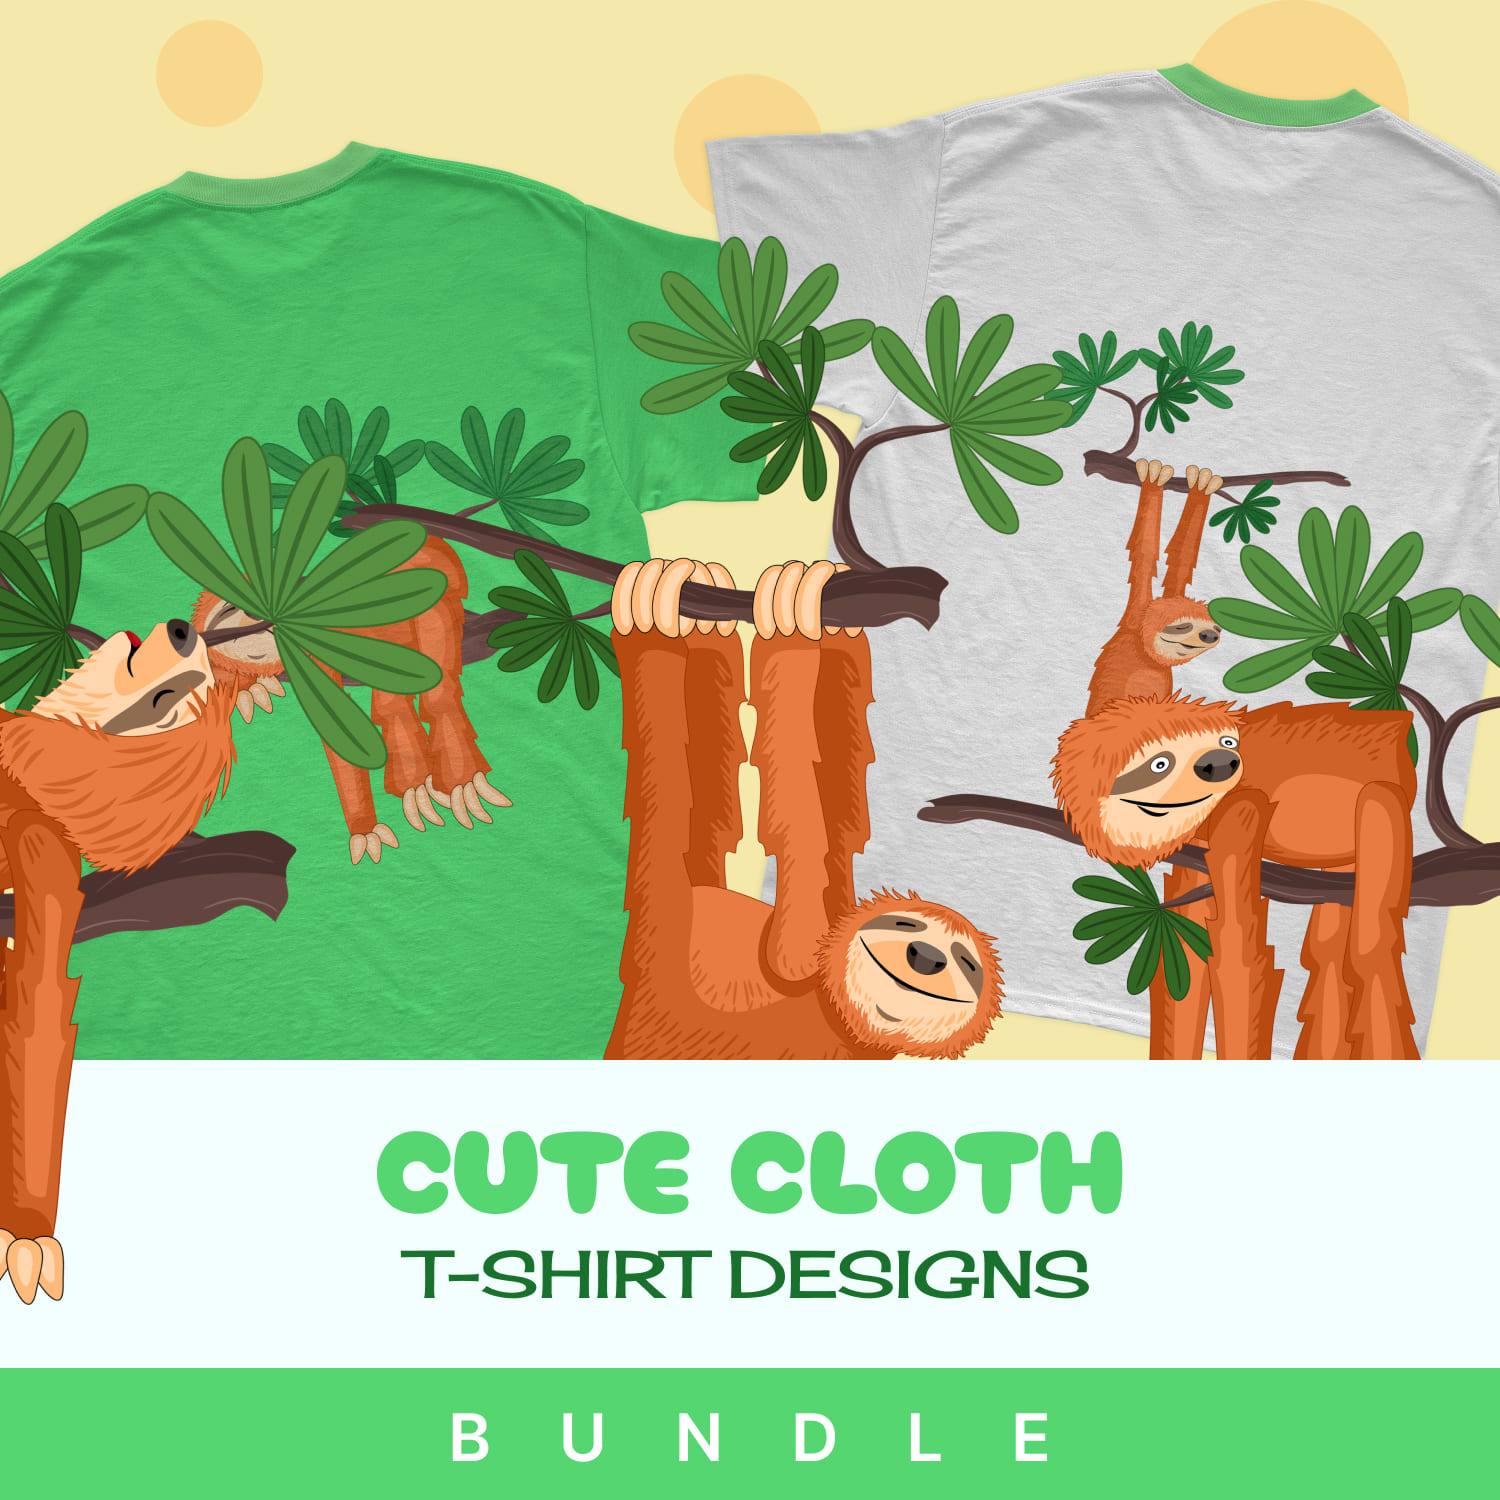 A set of t-shirts with an enchanting print of sloths on a tree.